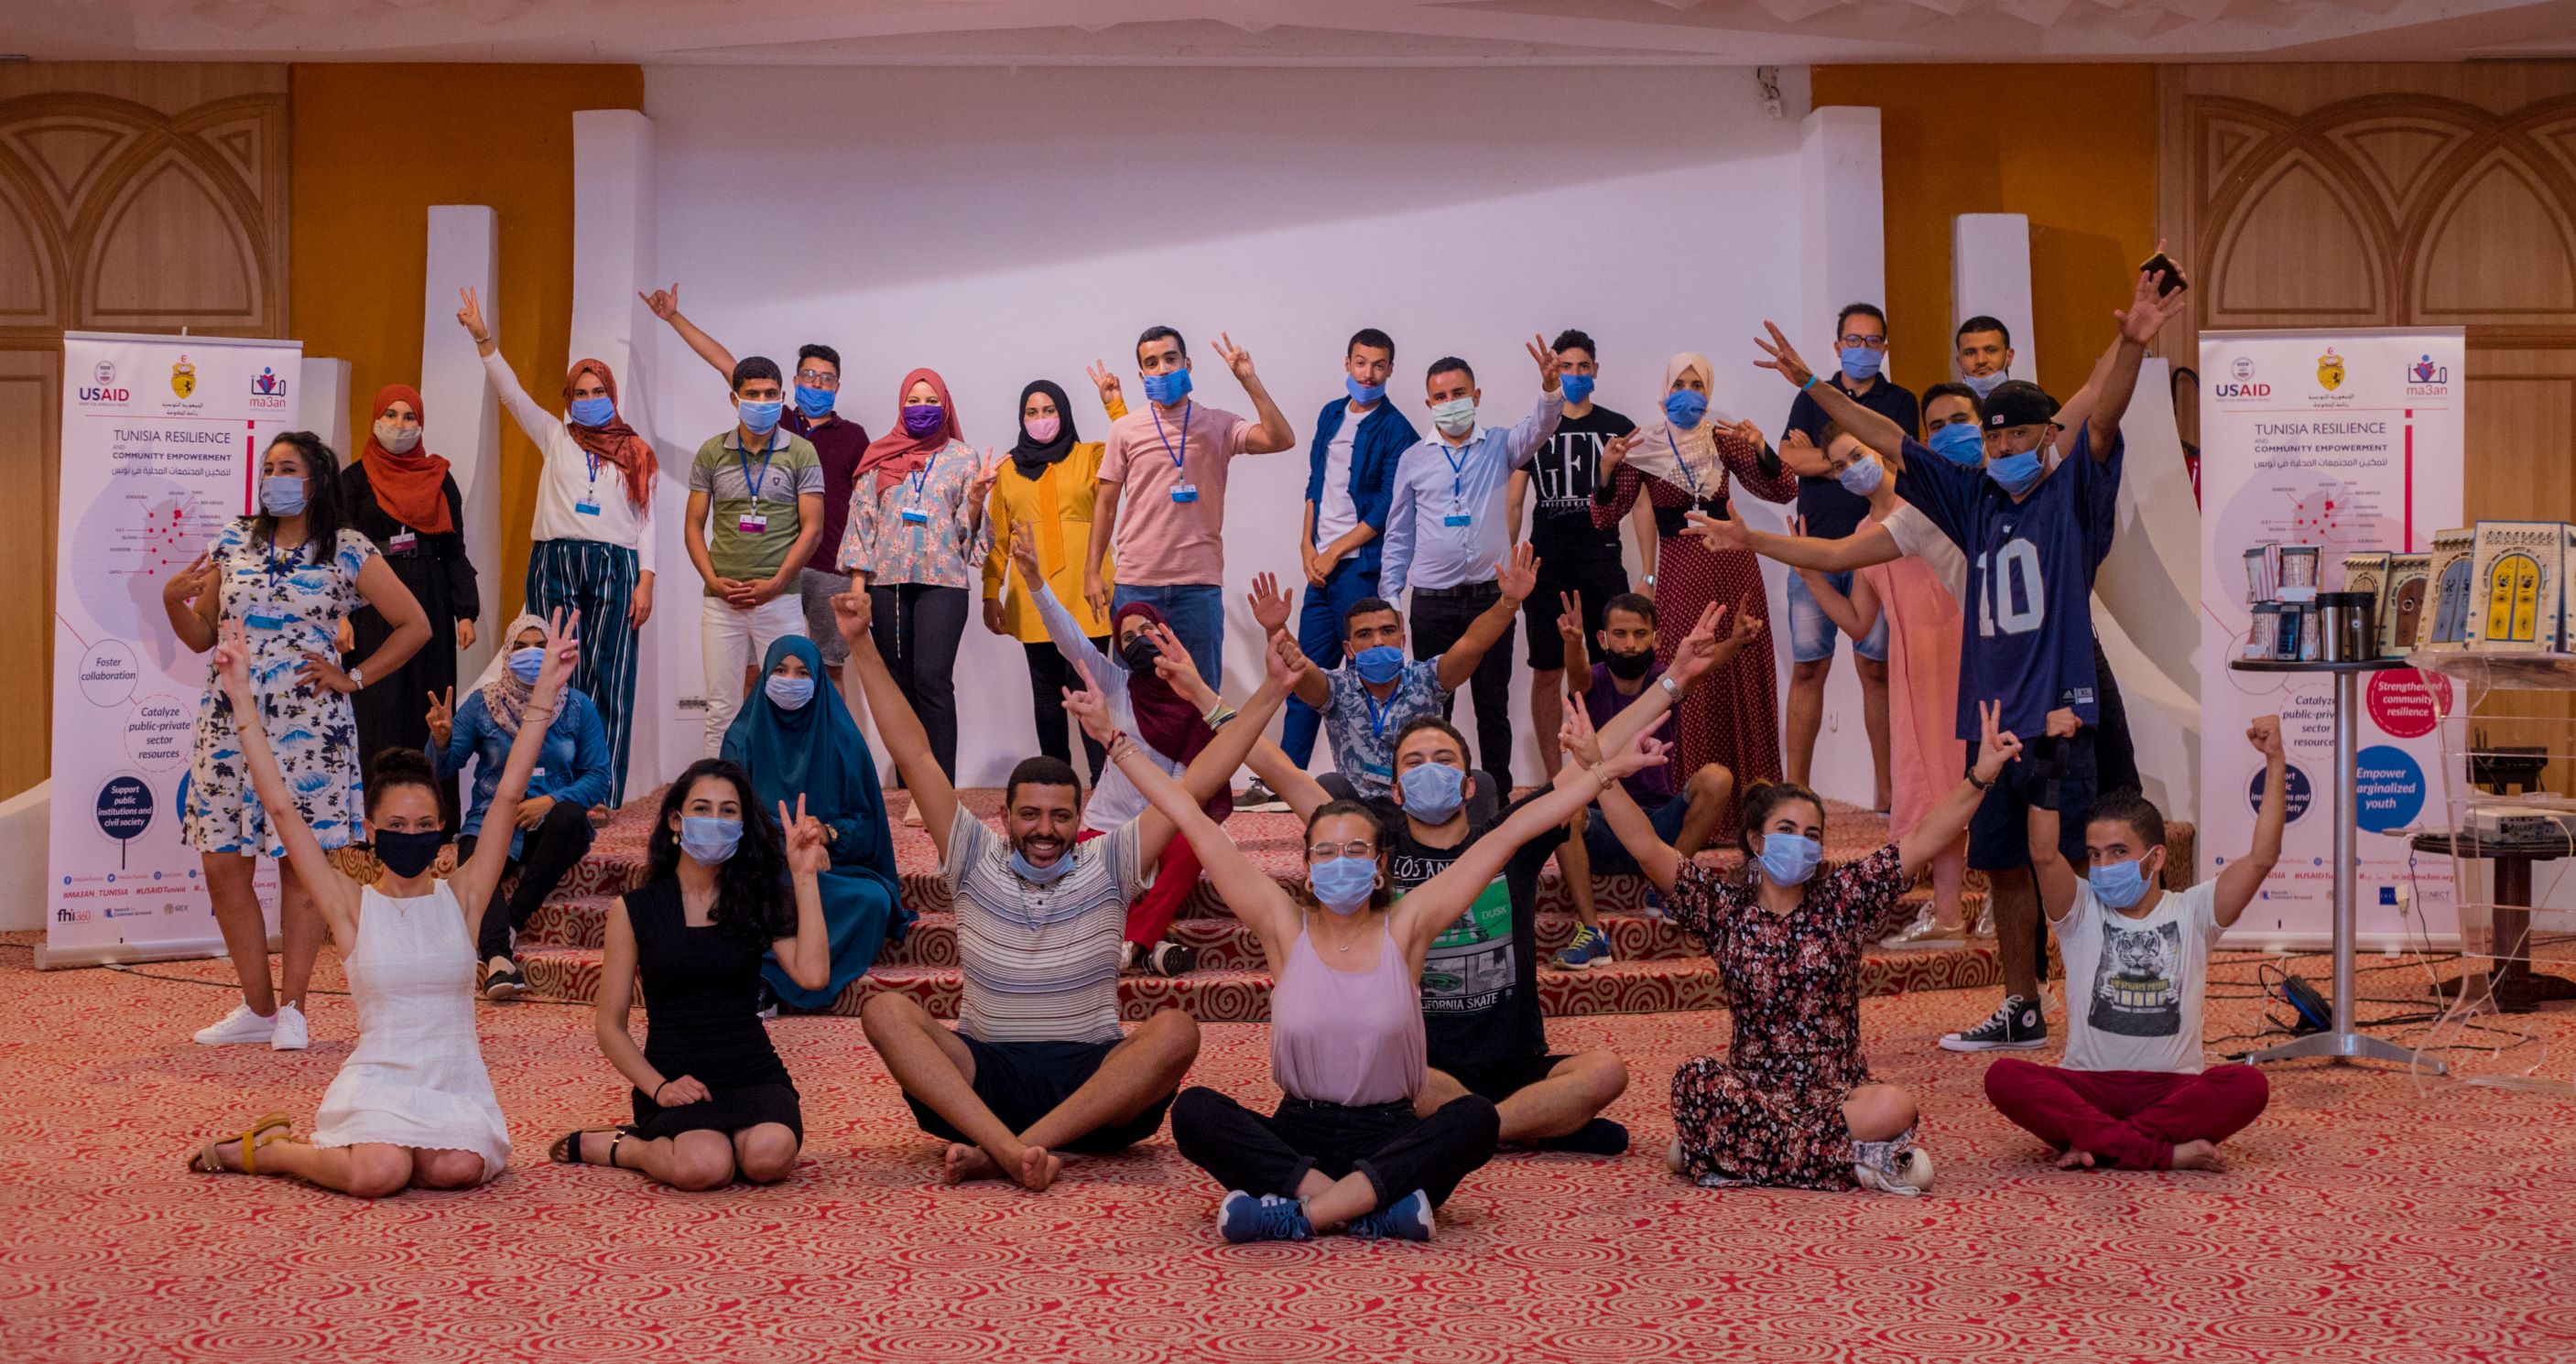 Photo of youth posing for a photo at a conference with their hands in the air and masks on their faces.